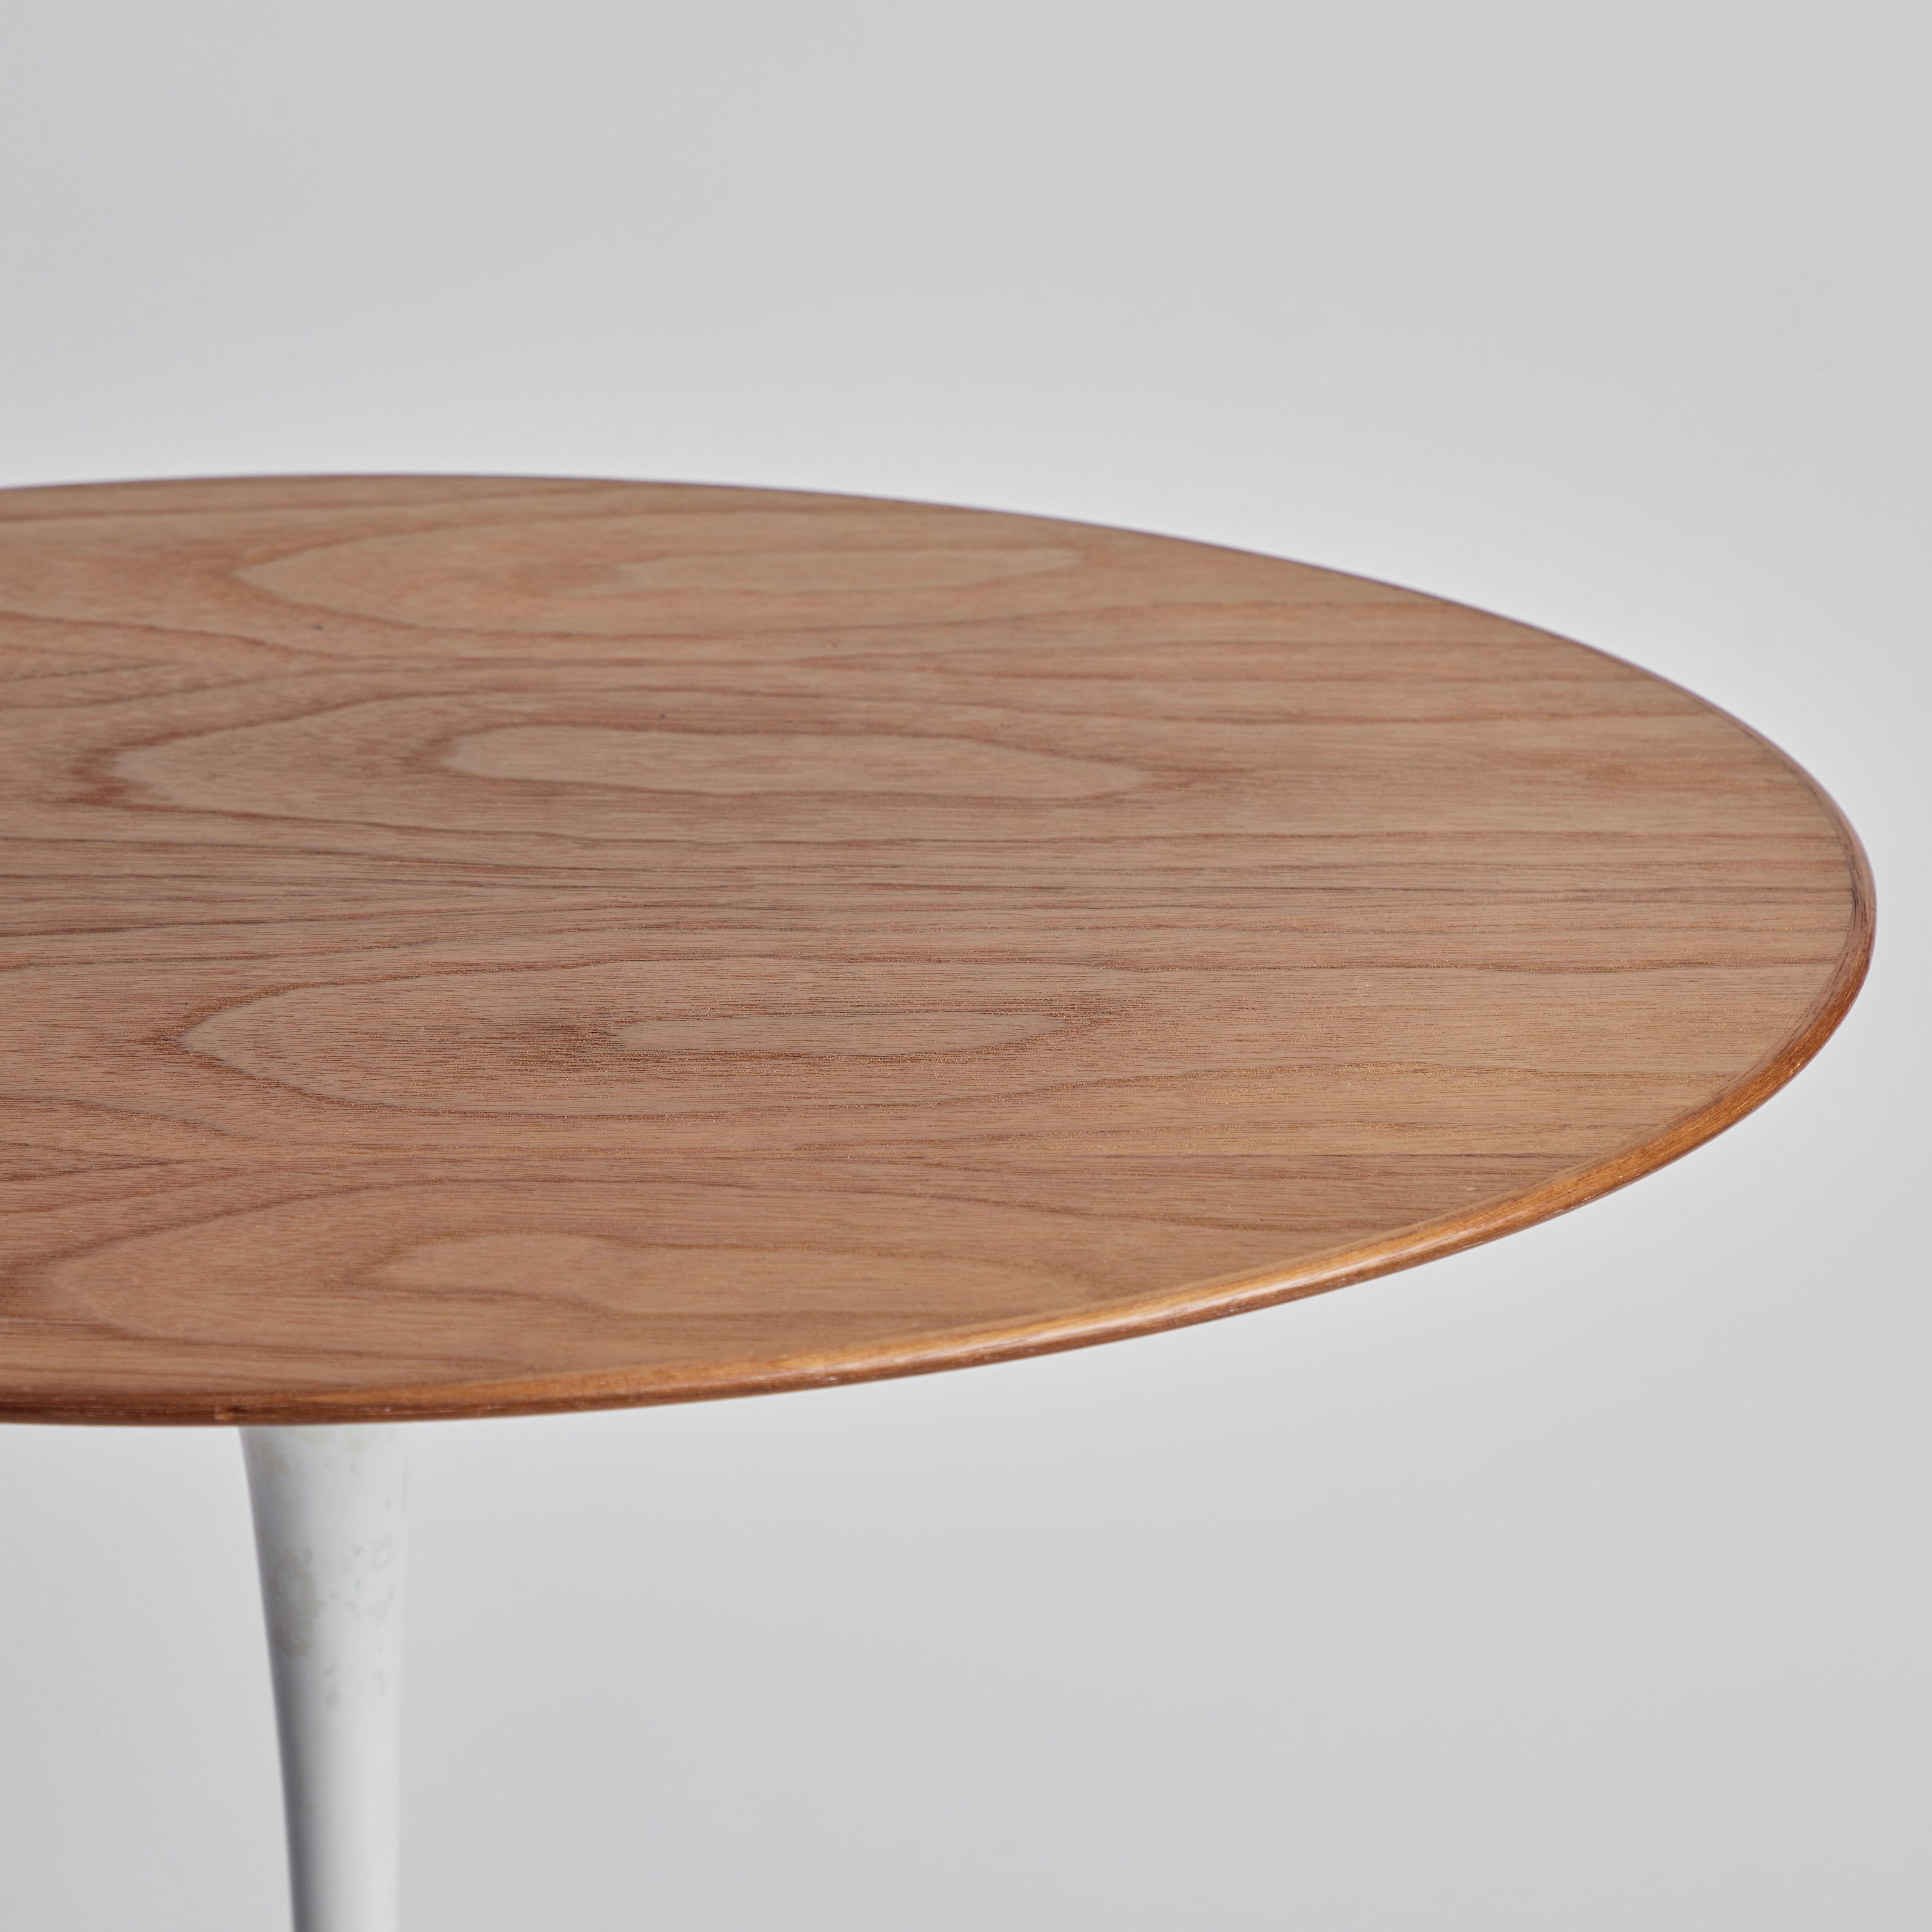 Enameled Rare 1960s Saarinen Oval Walnut Table with Early Knoll Label For Sale